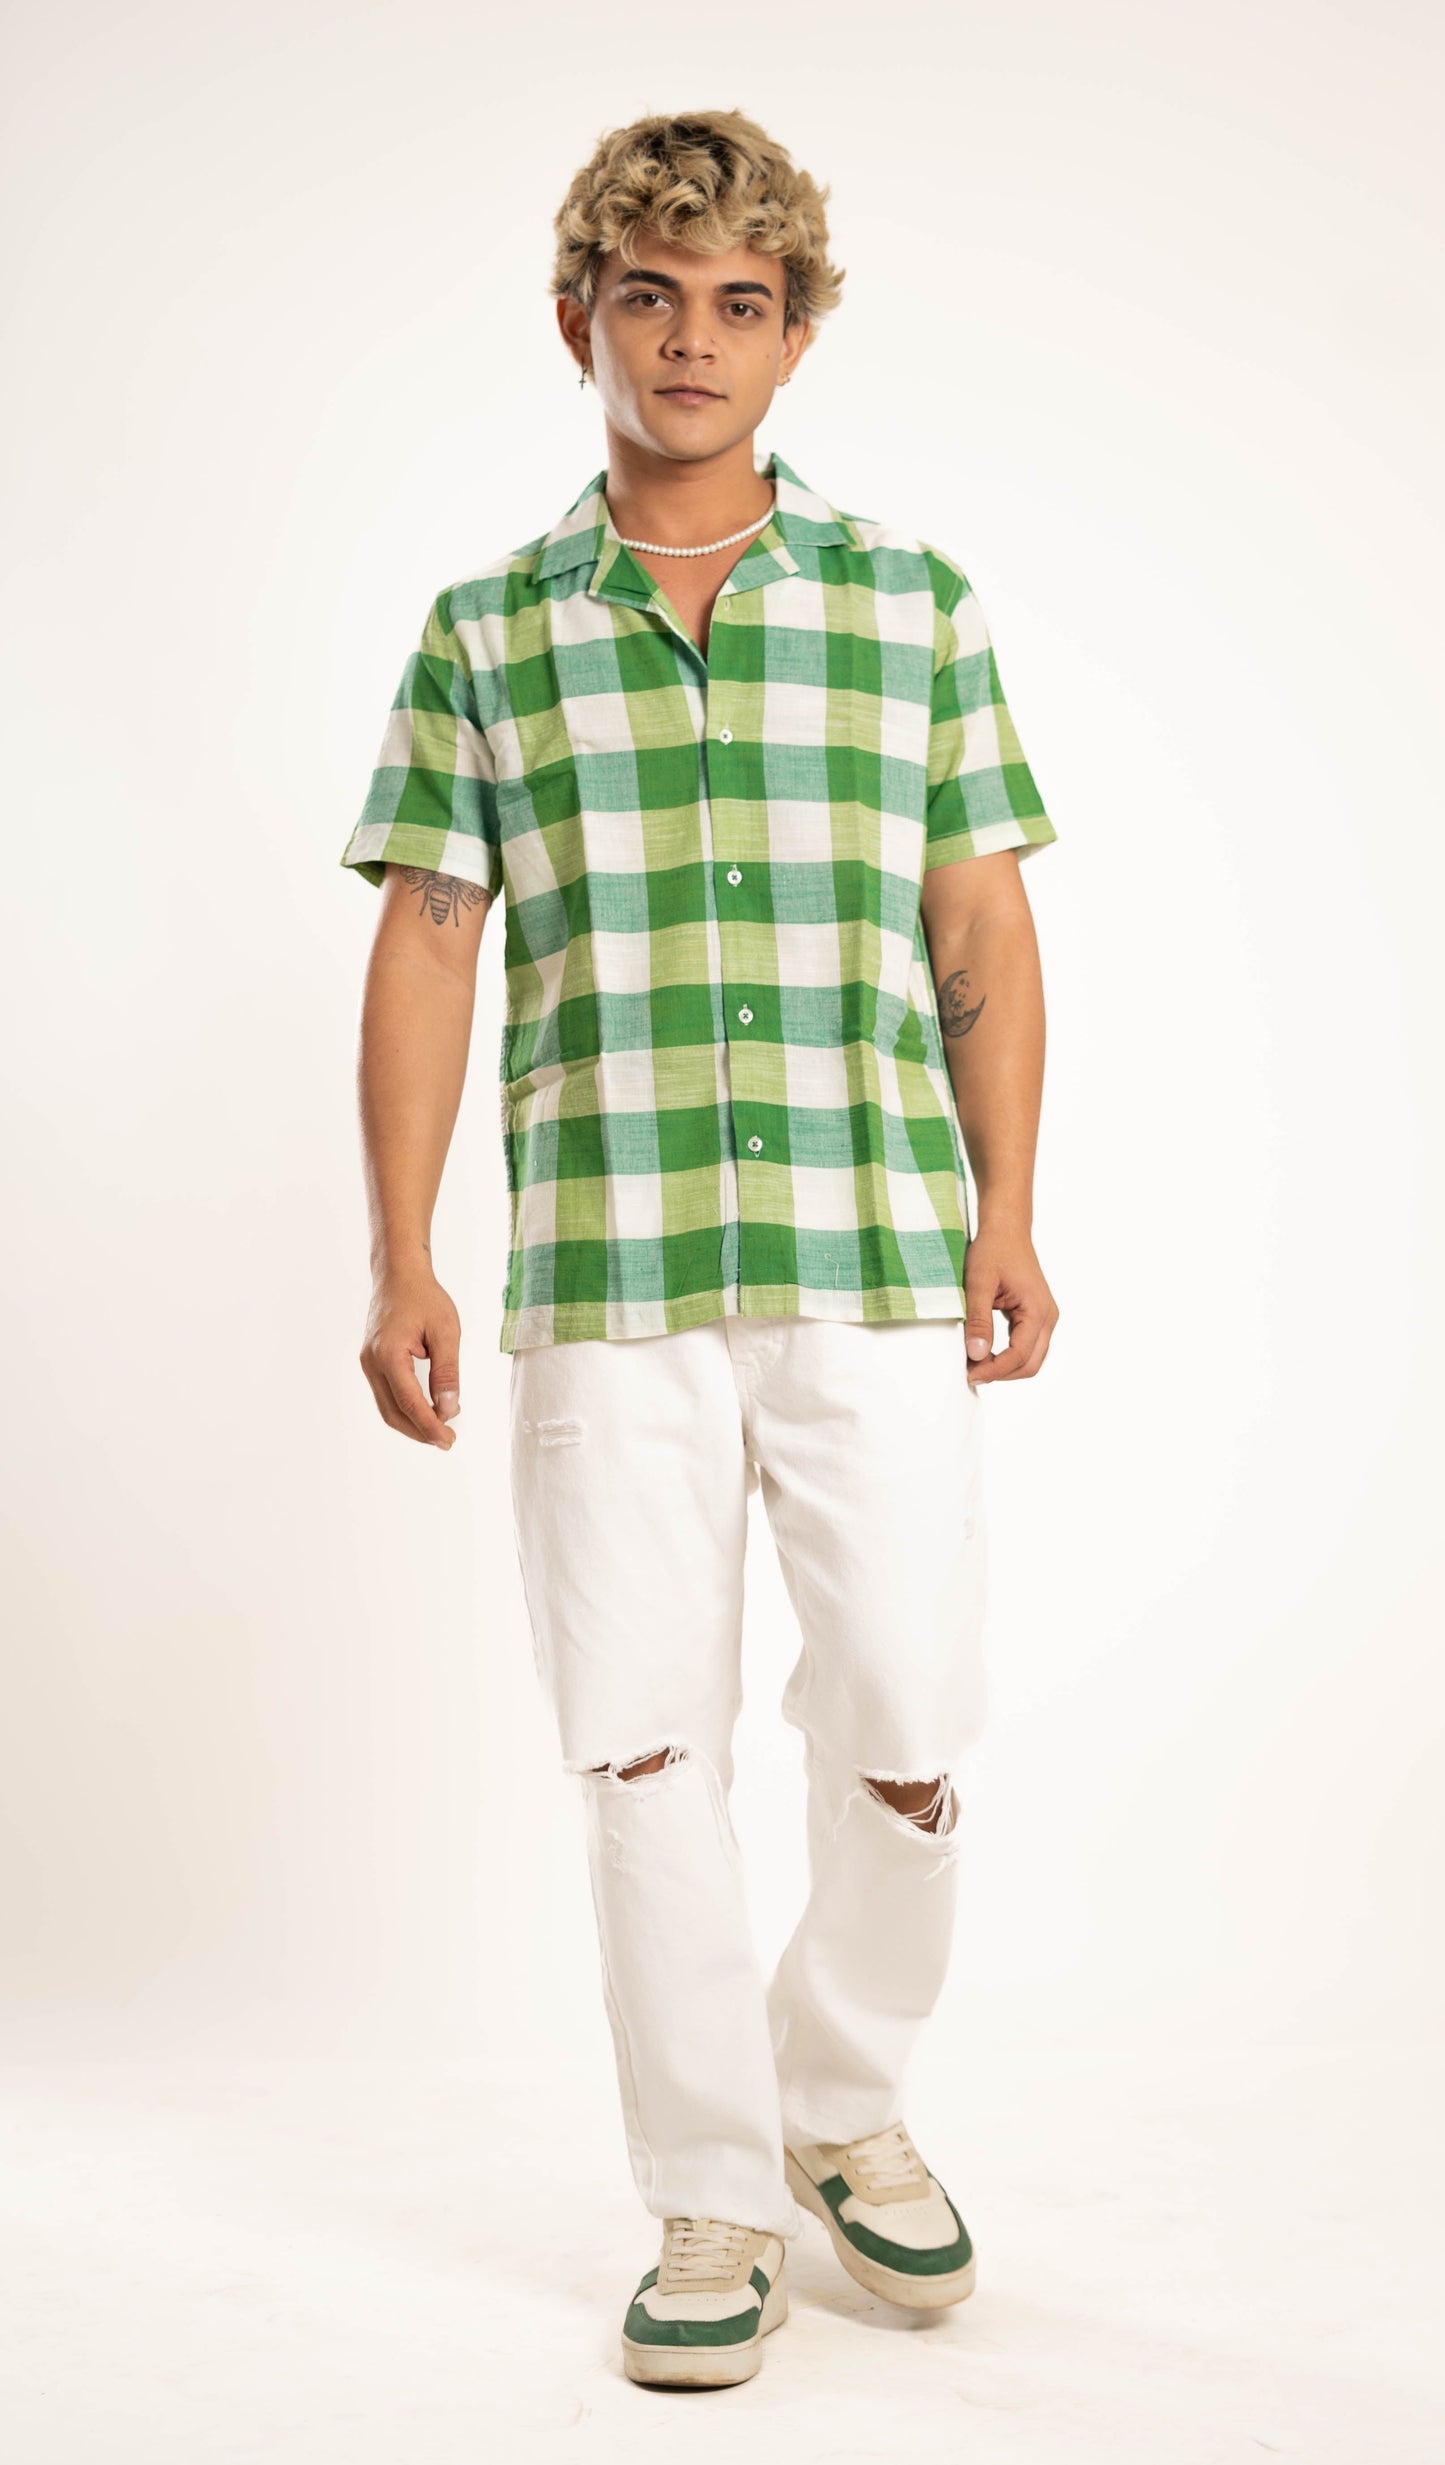 Men's Relaxed Fit Flannel Checked Short Sleeves Green & White Shirt